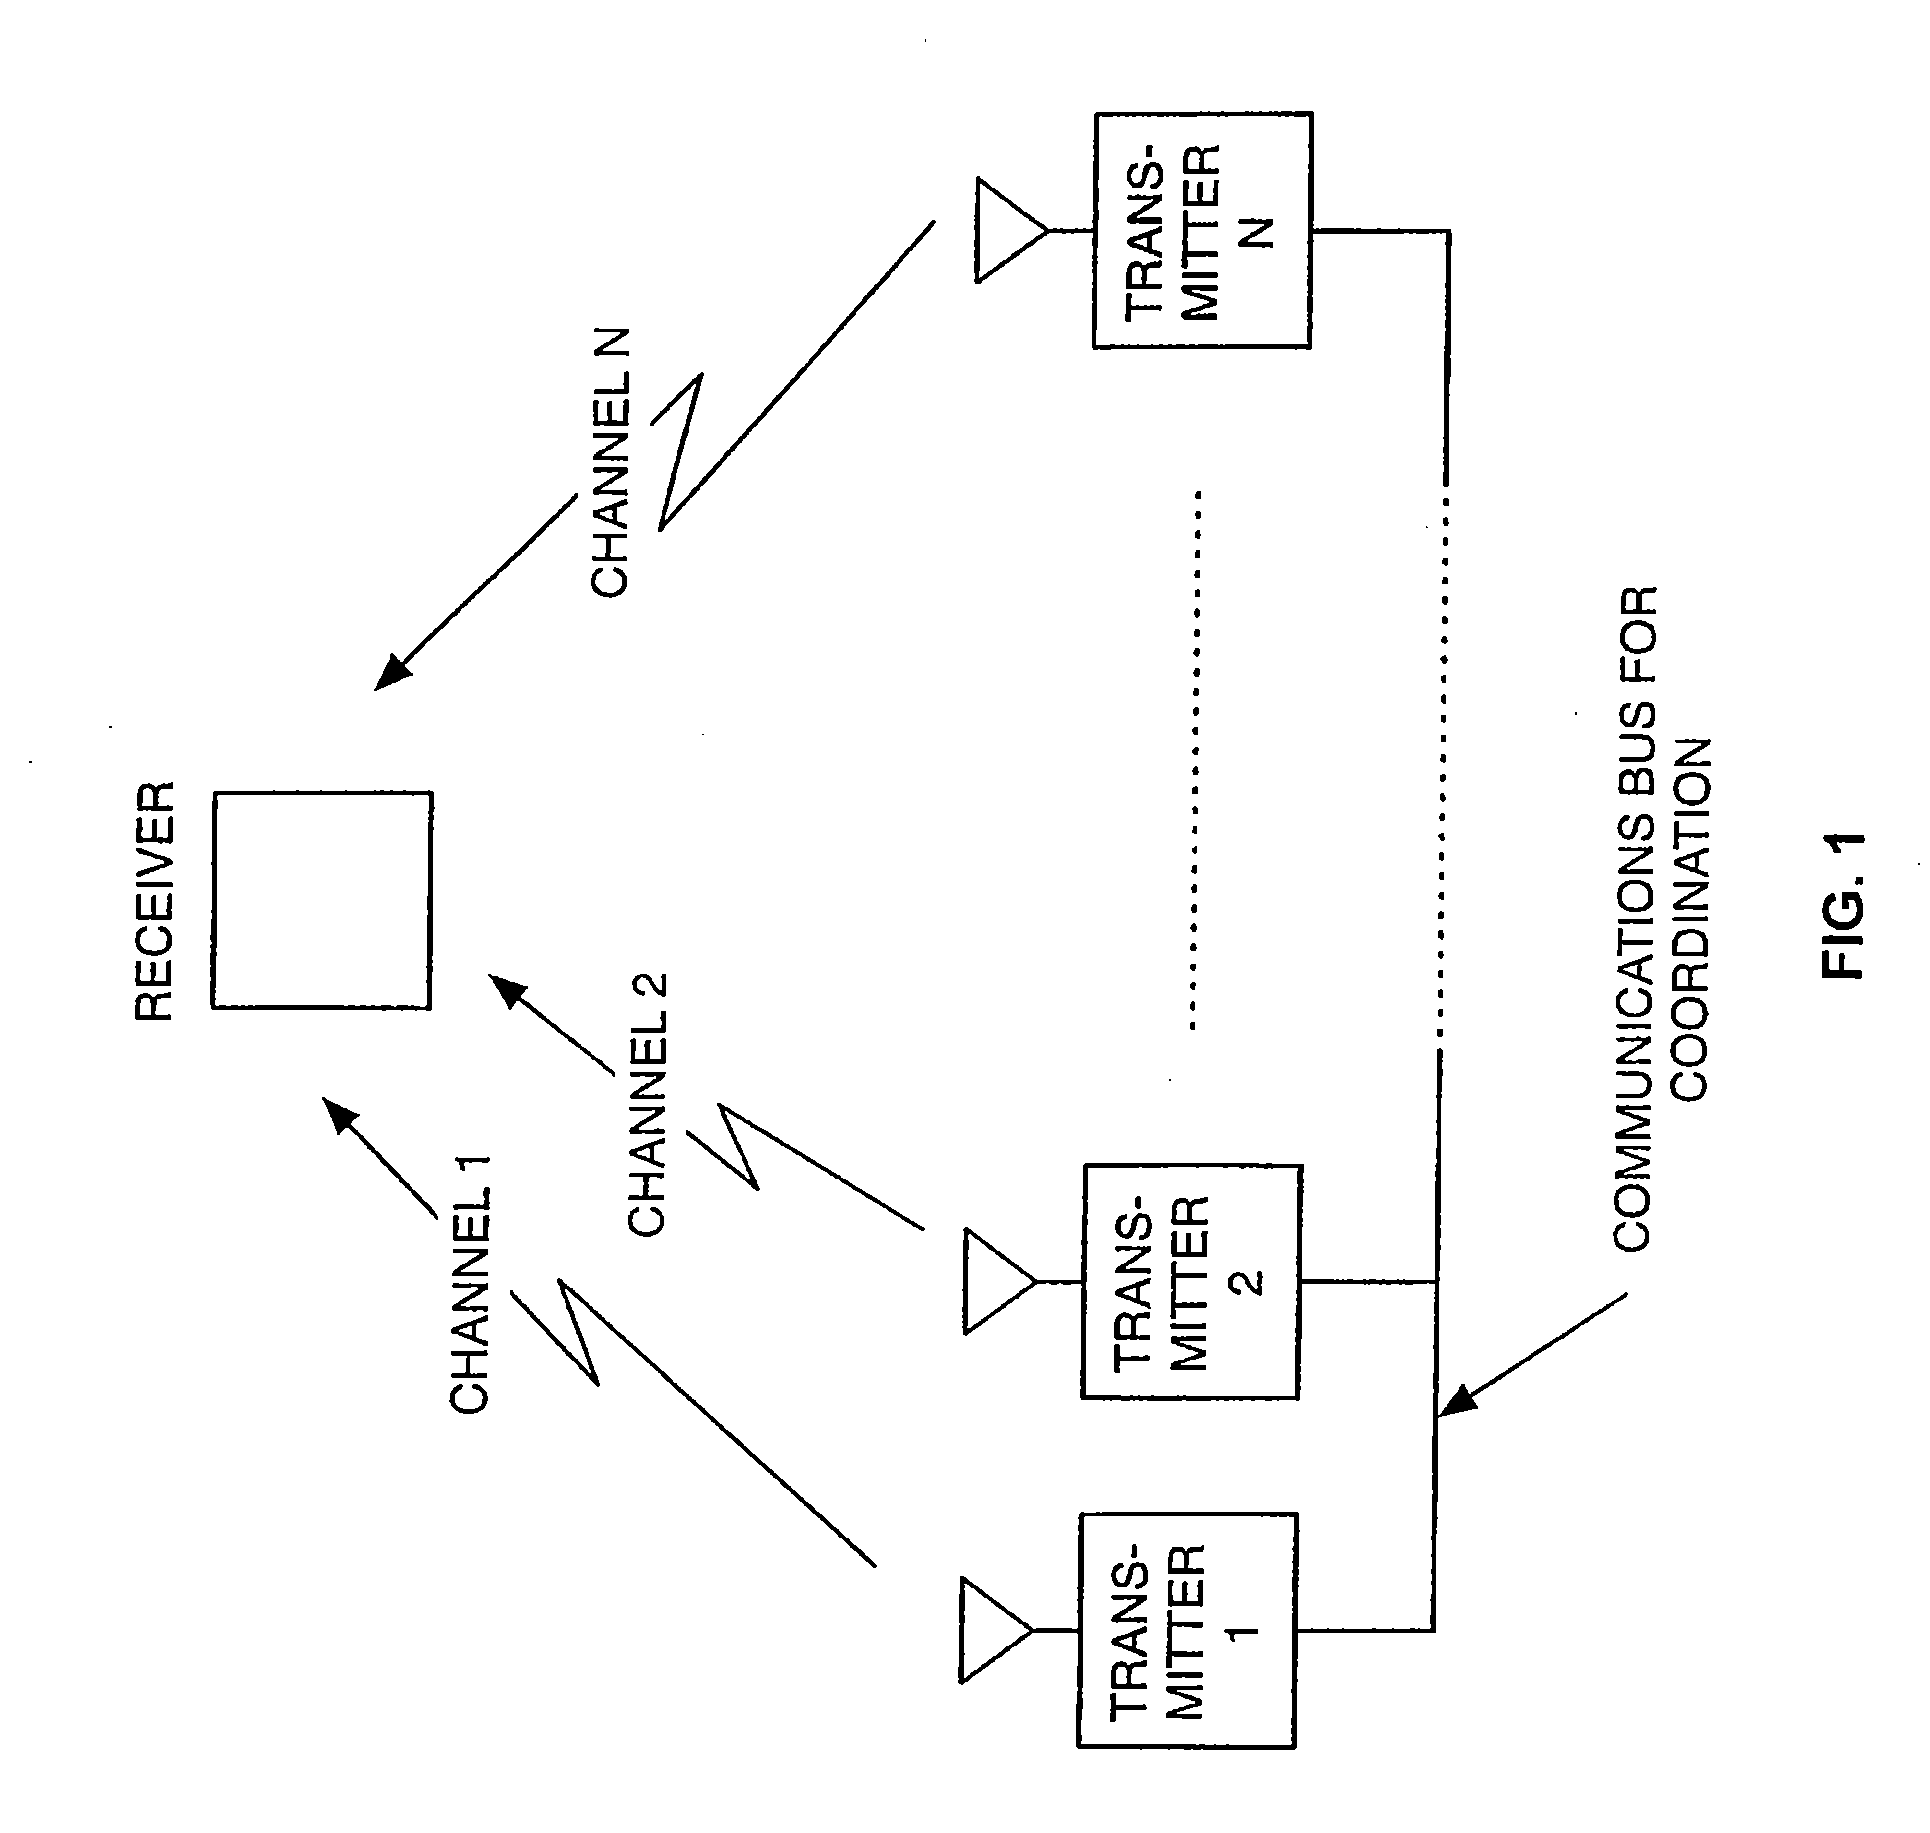 Method and System for Cooperative Communications with Minimal Coordination